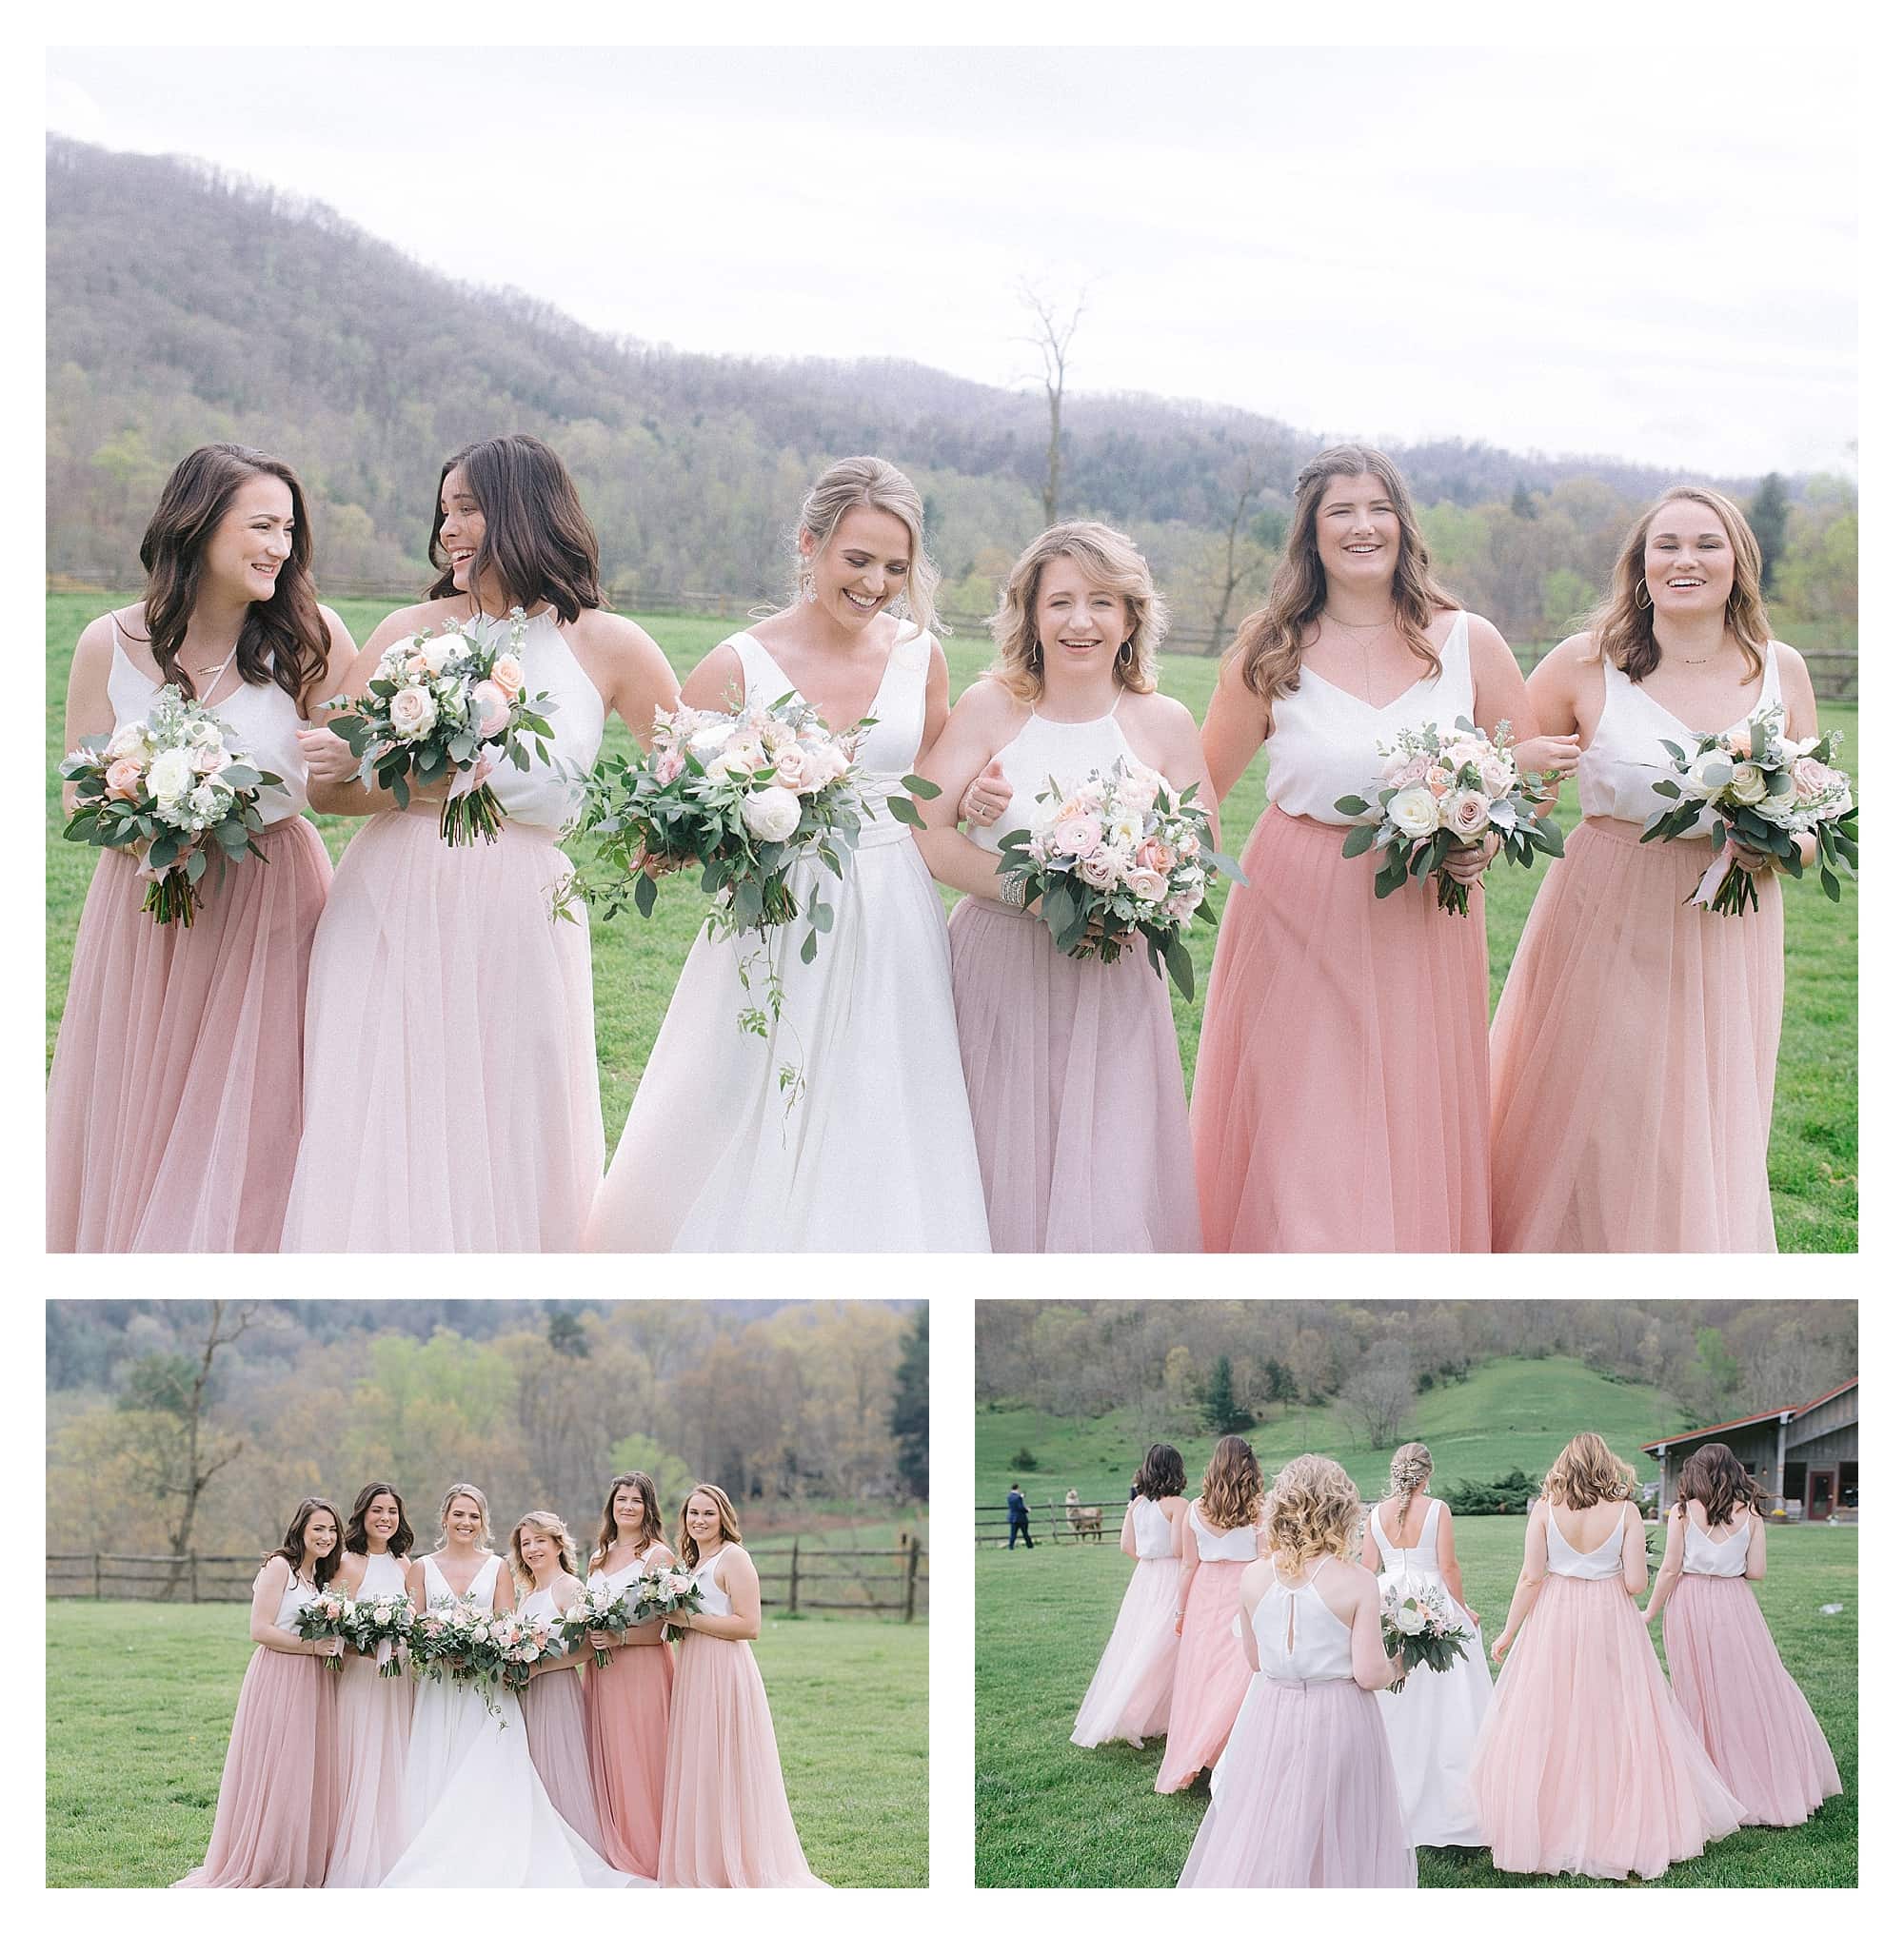 Bride and bridesmaids holding cream and peach floral bouquets